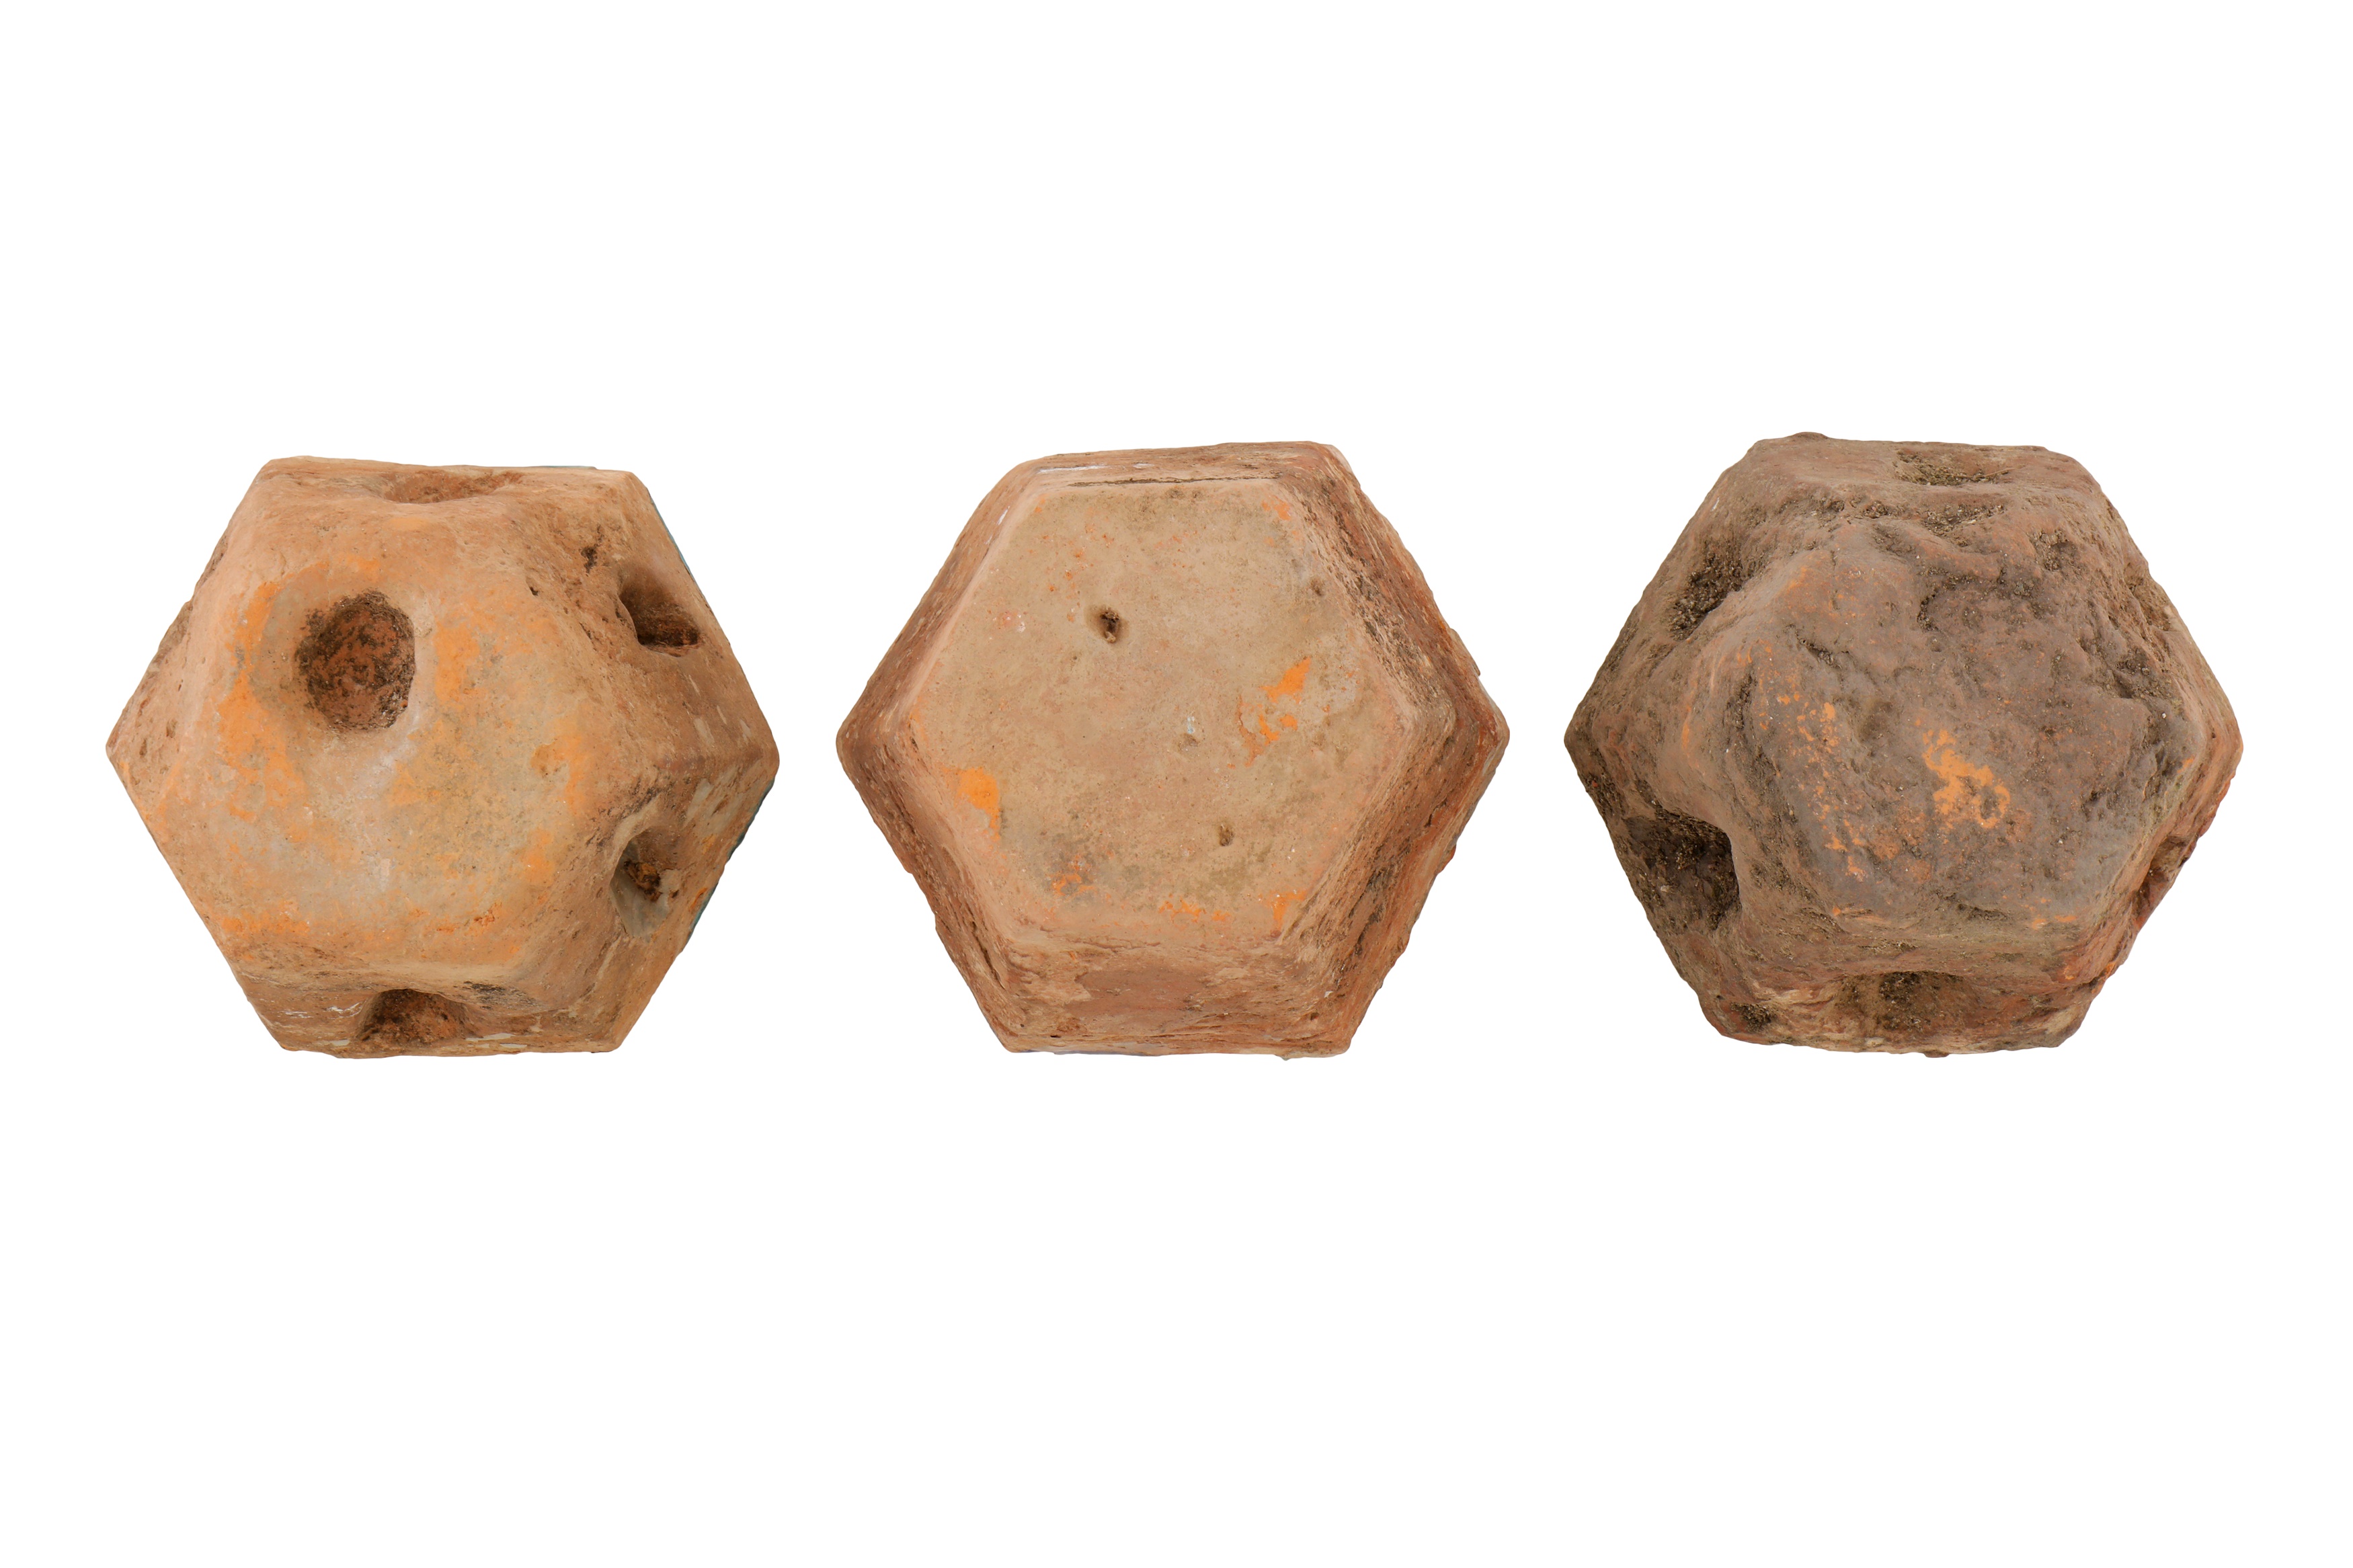 THREE 14TH-16TH CENTURY INDIAN SULTANATE DECCAN GLAZED POTTERY HEXAGONAL TILES - Image 4 of 4